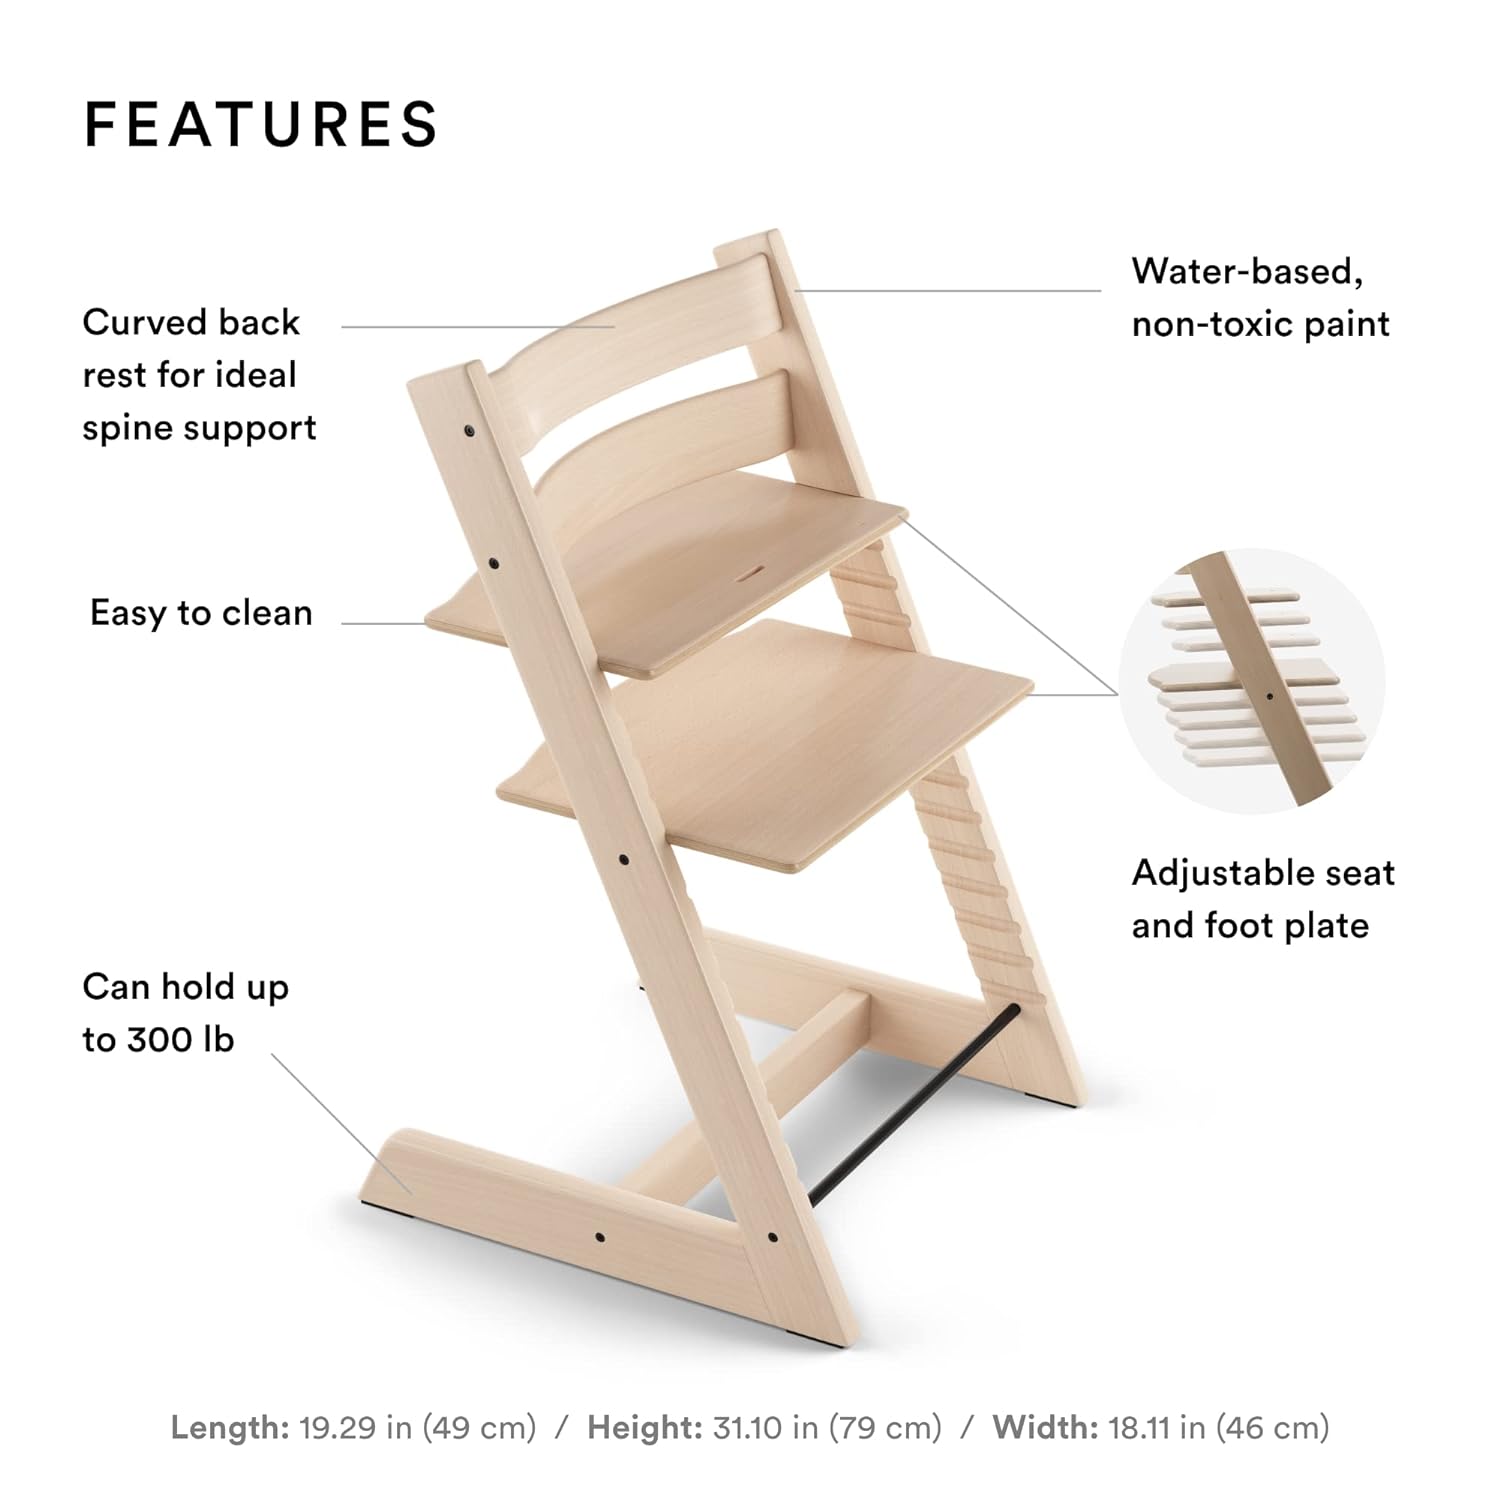 Stokke Tripp Trapp Chair from Stokke, Adjustable, Convertible Chair